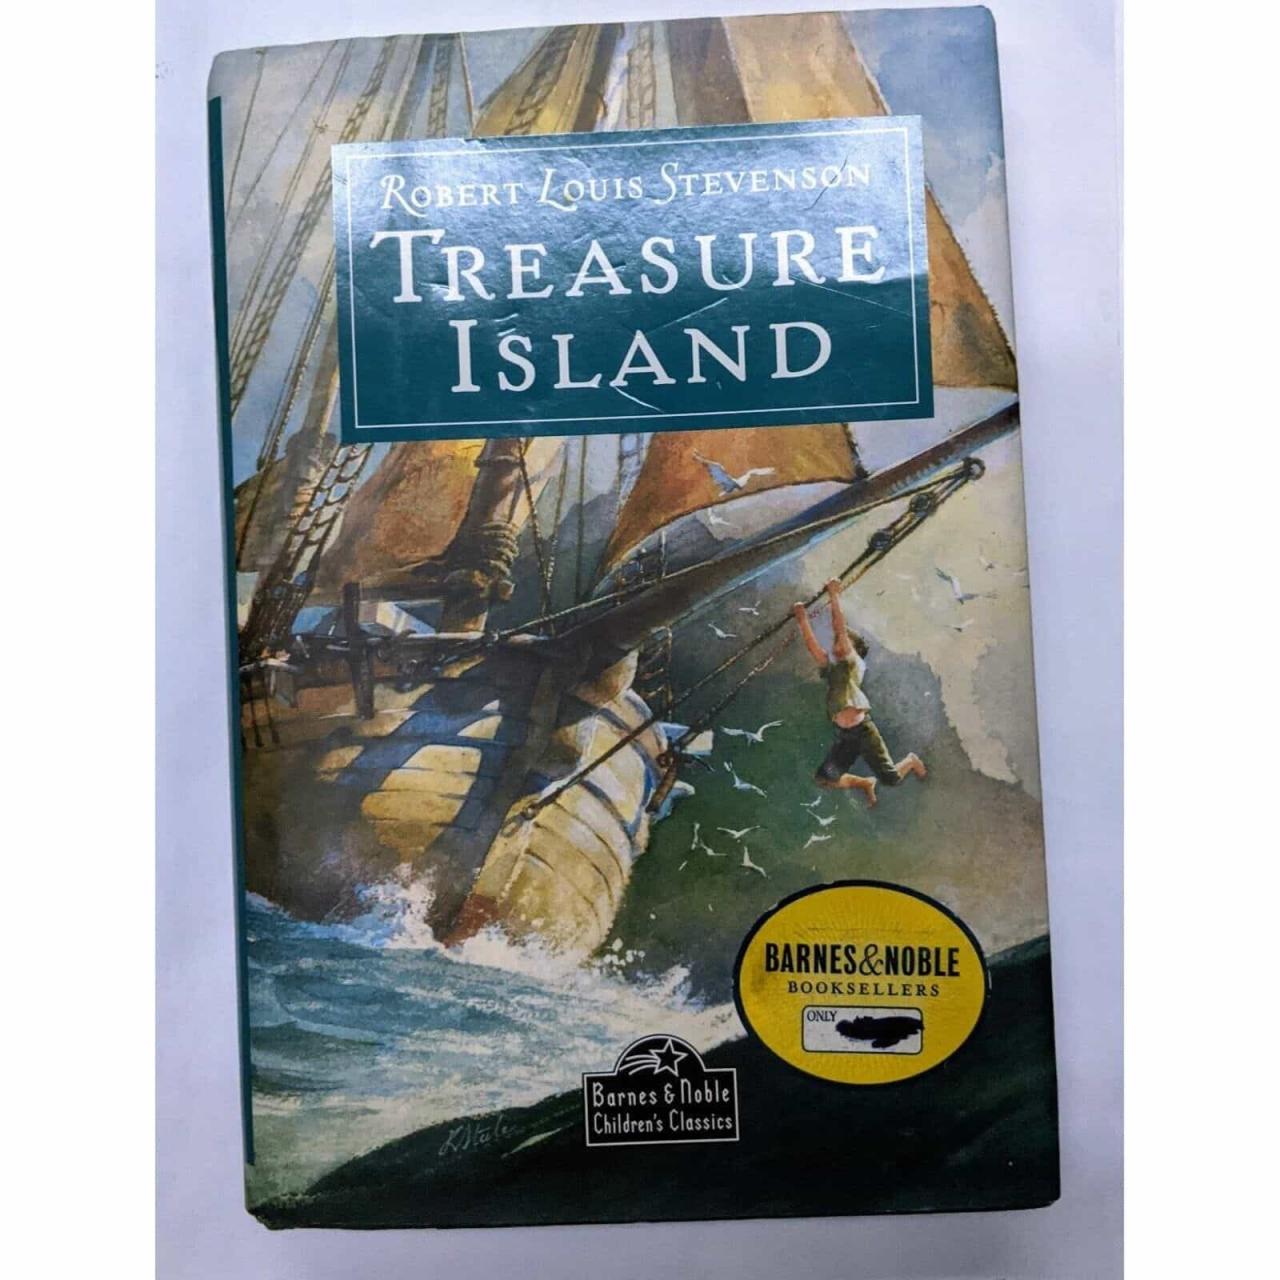 A book that takes place on an island